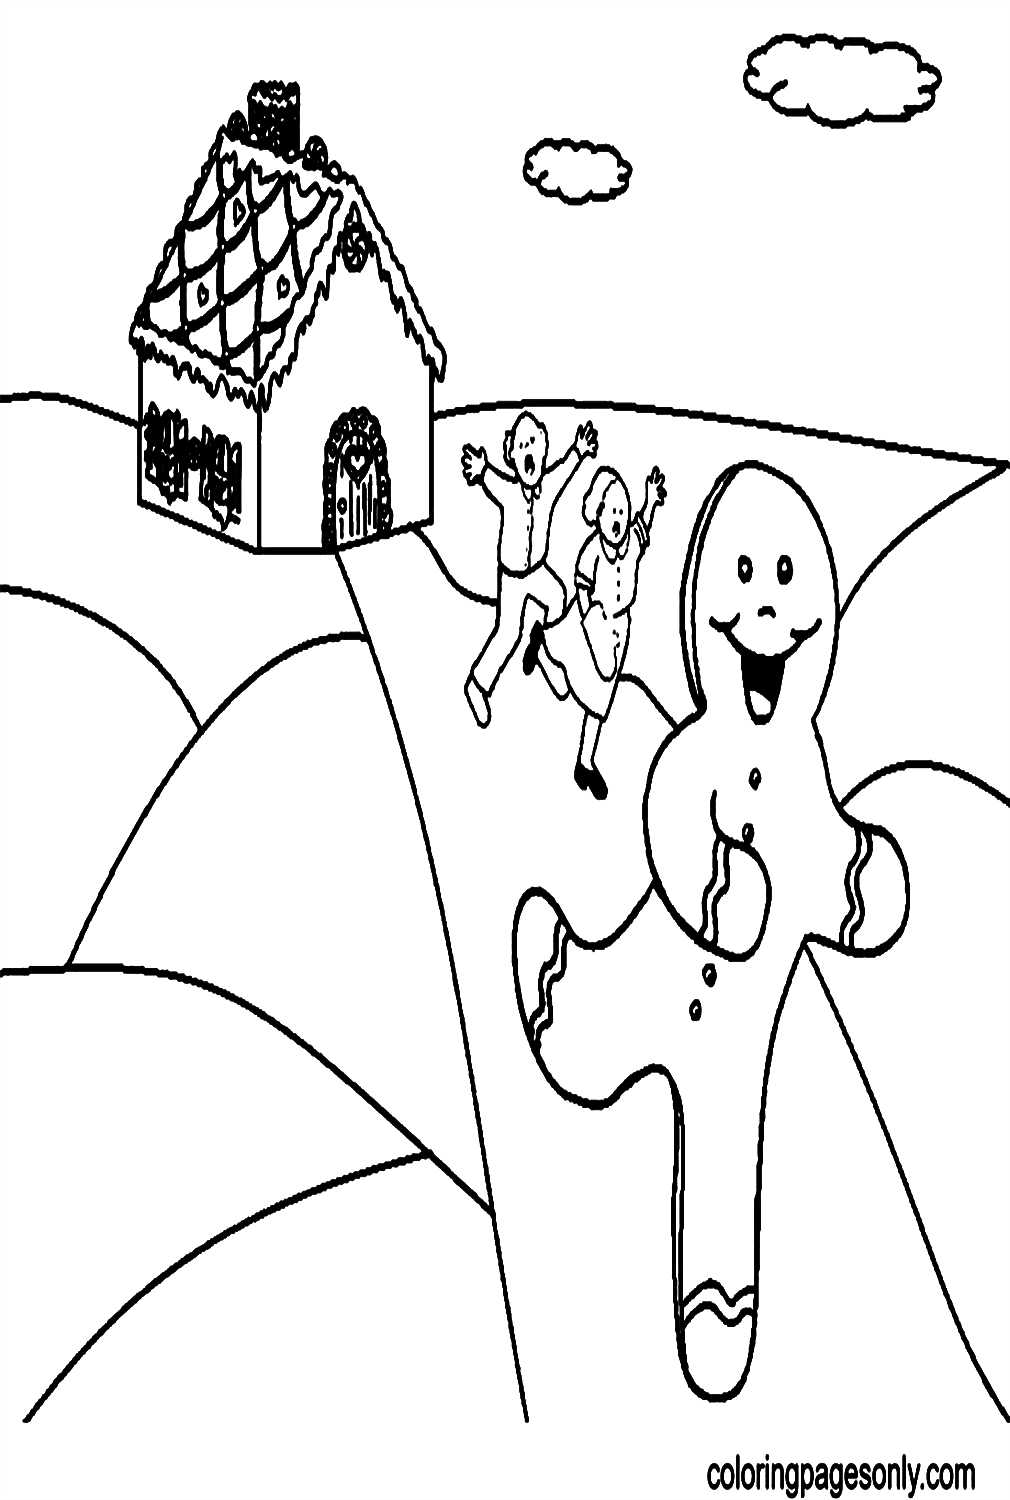 A Woman and A Man Chasing Gingerbread Man Coloring Page